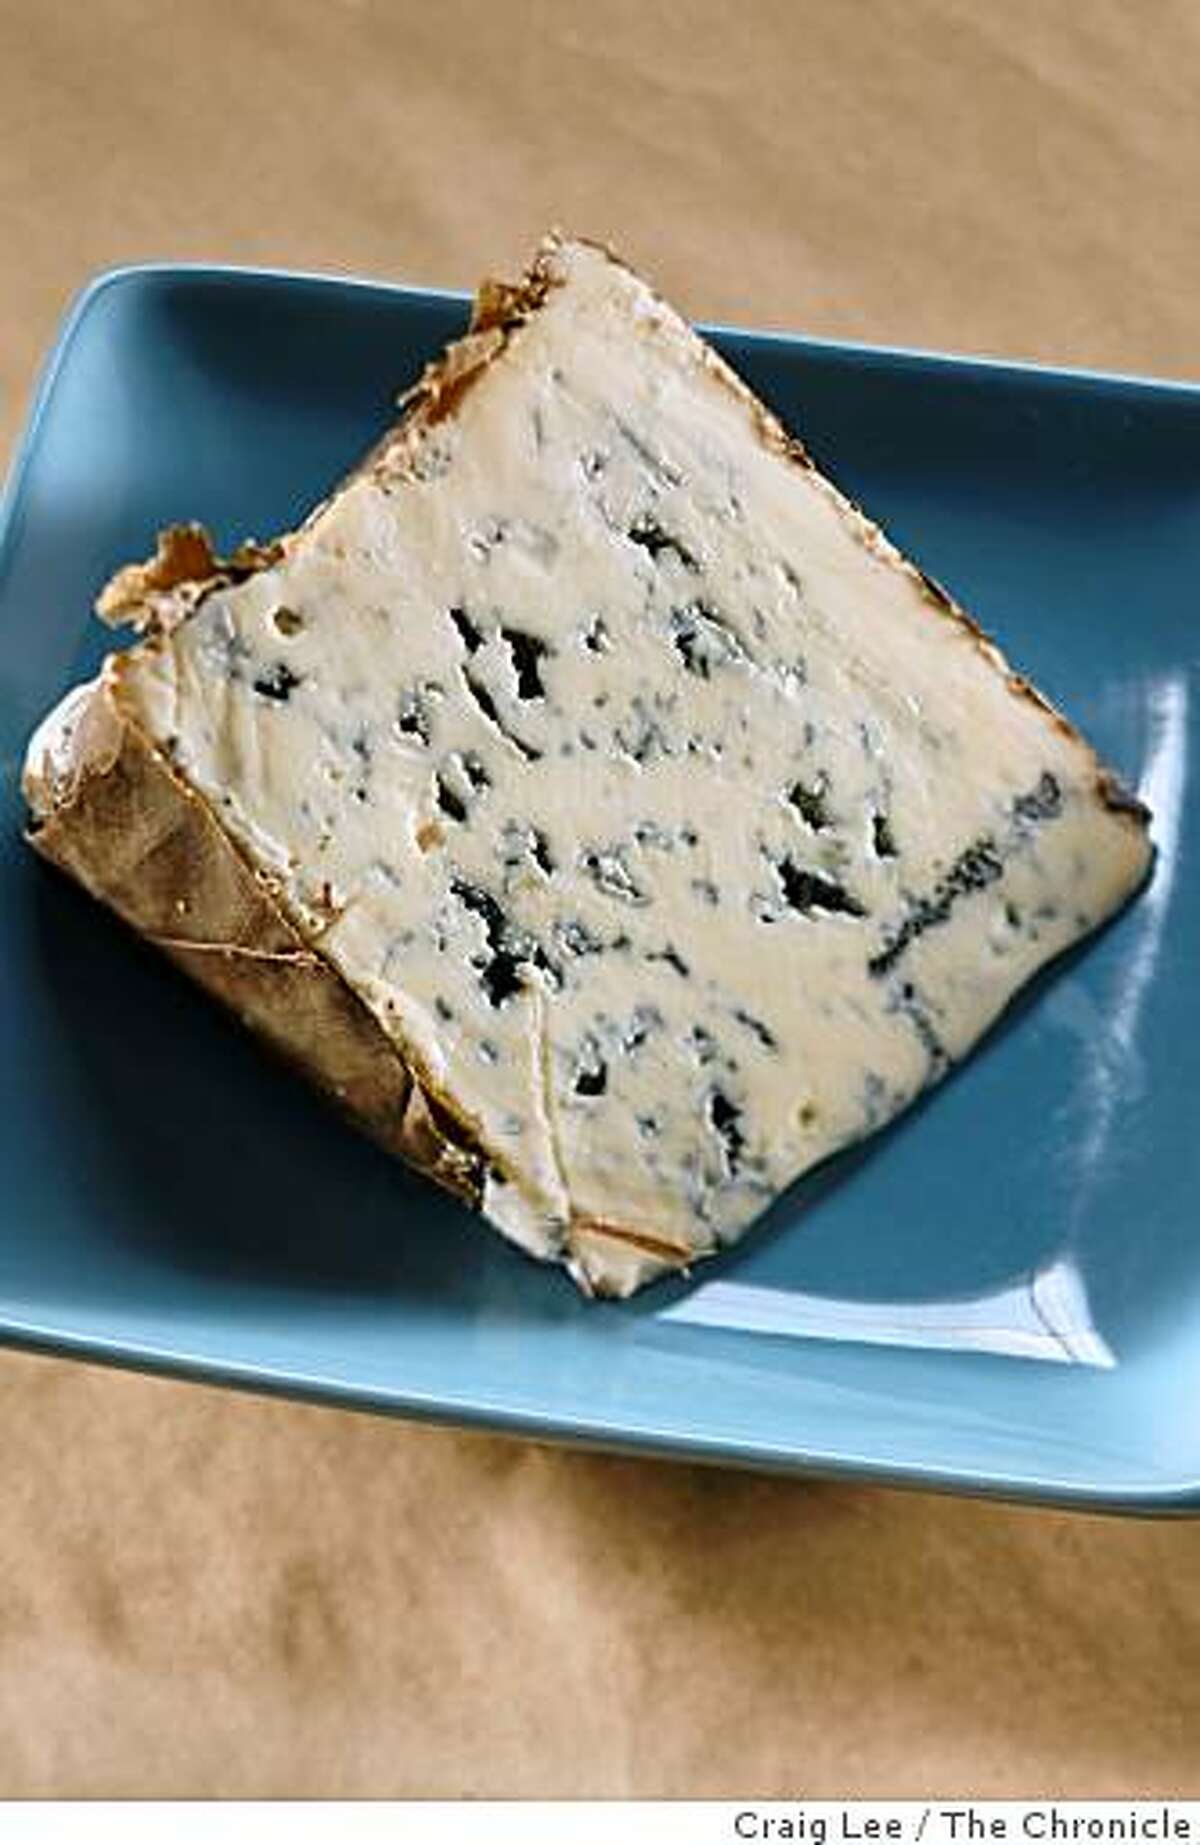 Pena Azul blue cheese cheese, in San Francisco, Calif., on September 11, 2008.